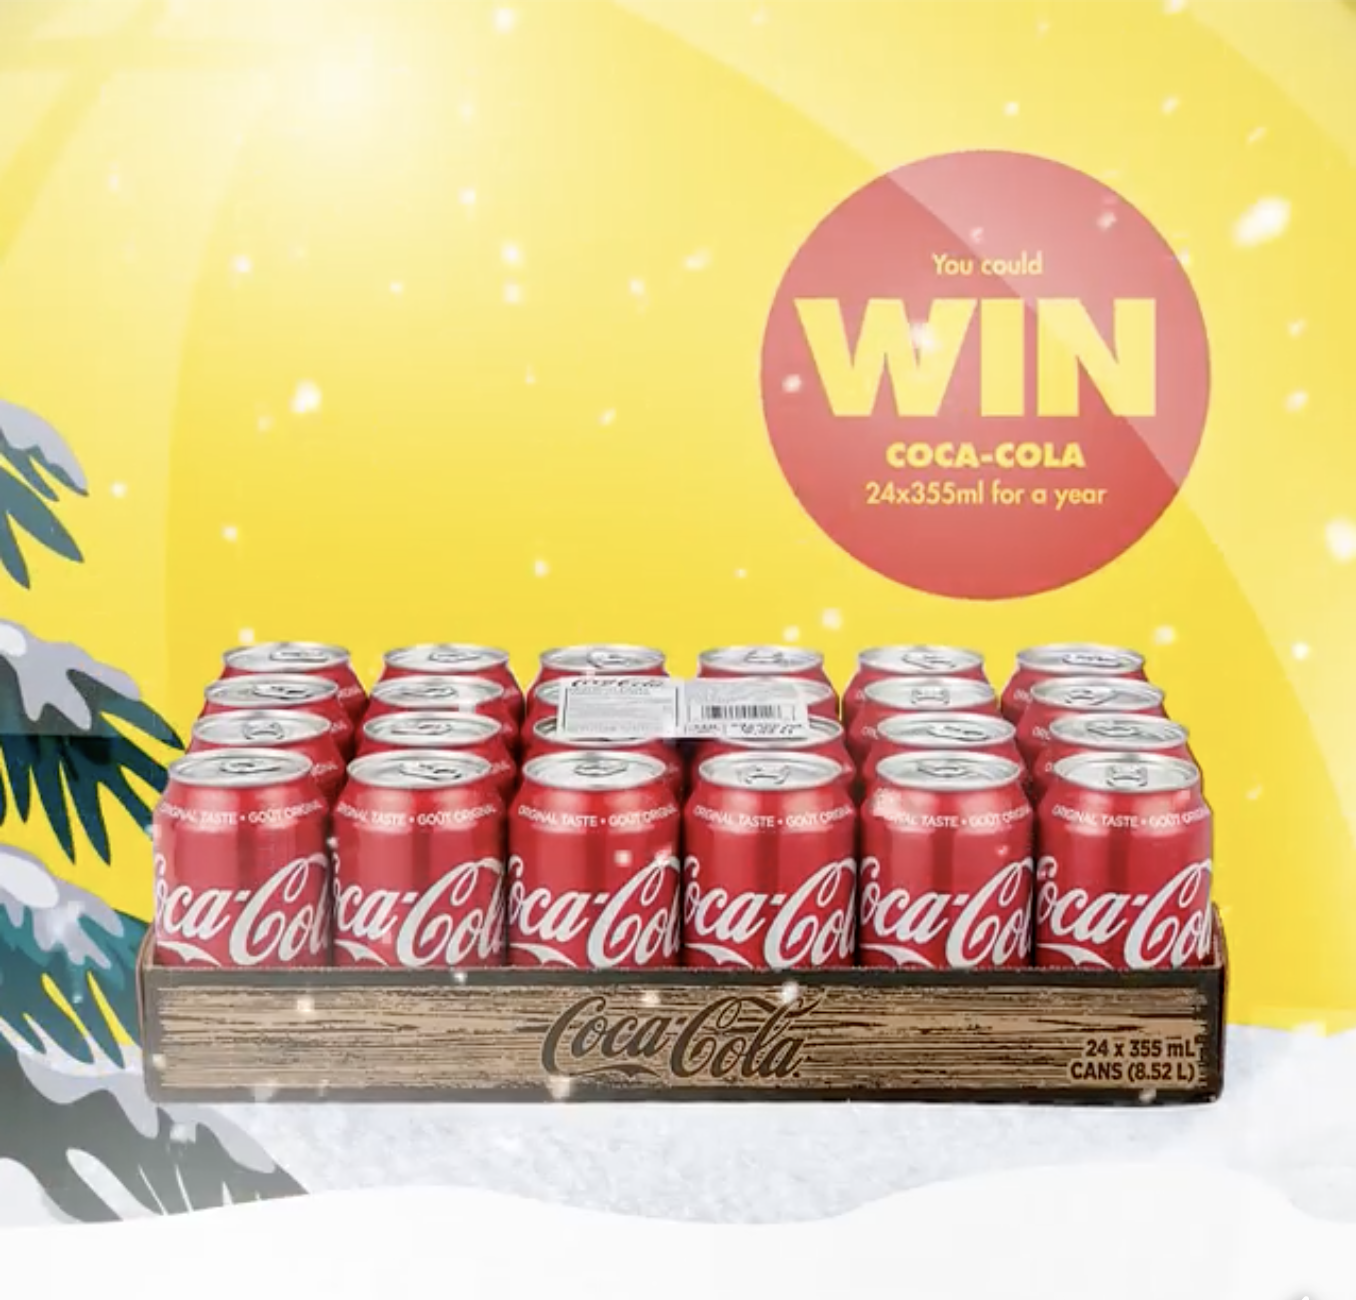 Win Free Coke For A Year From No Frills